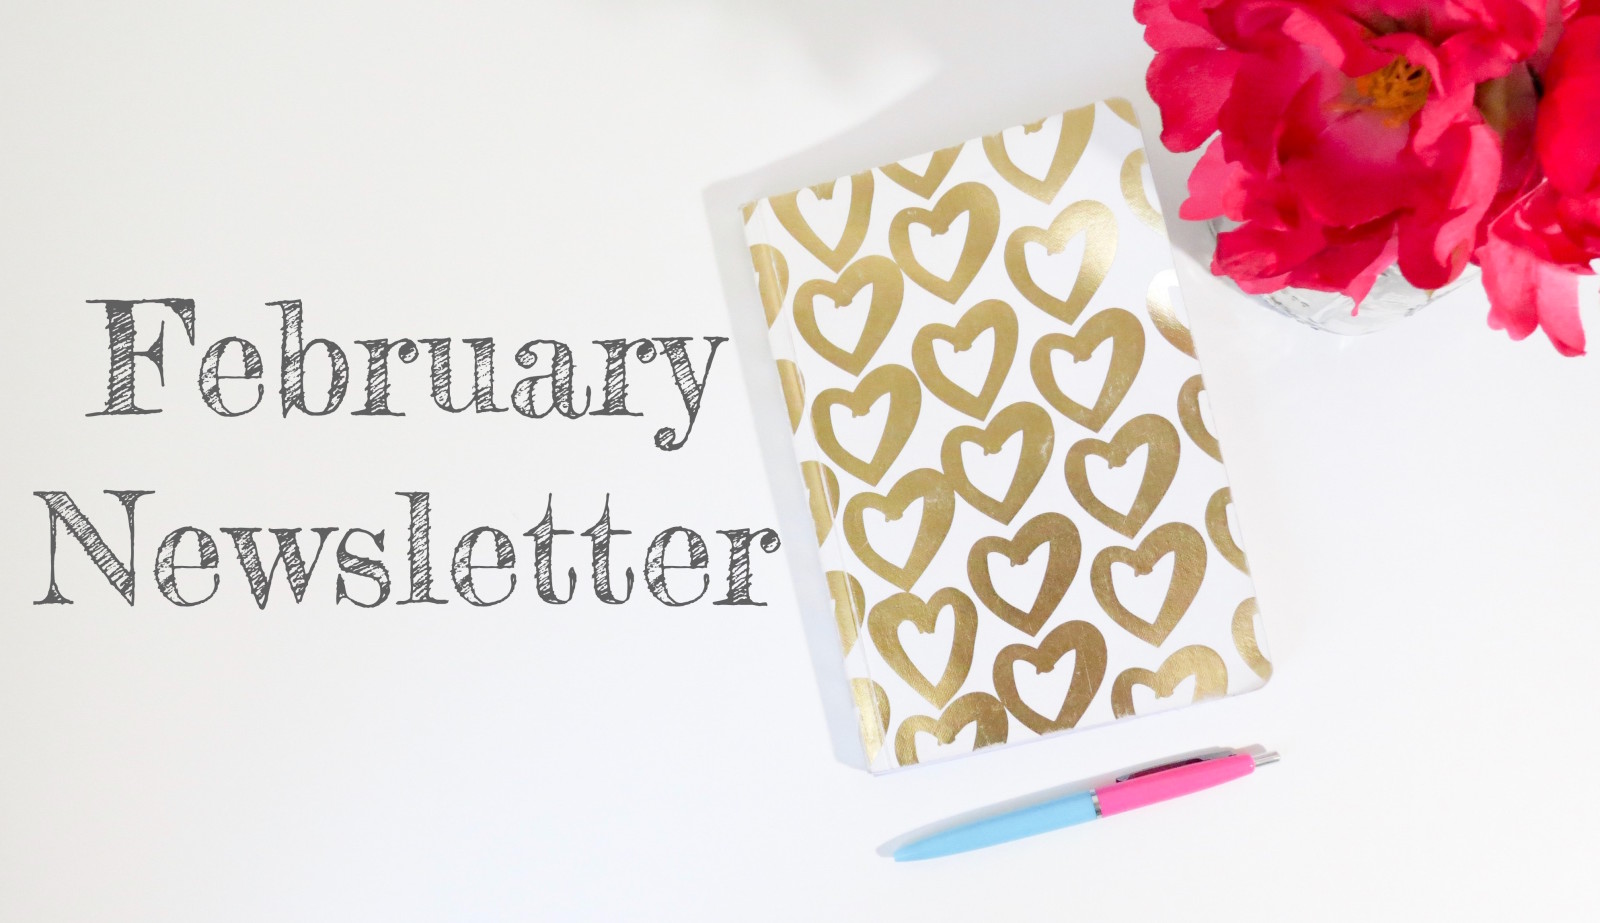 February: Love is in the air - and giveaways too!!